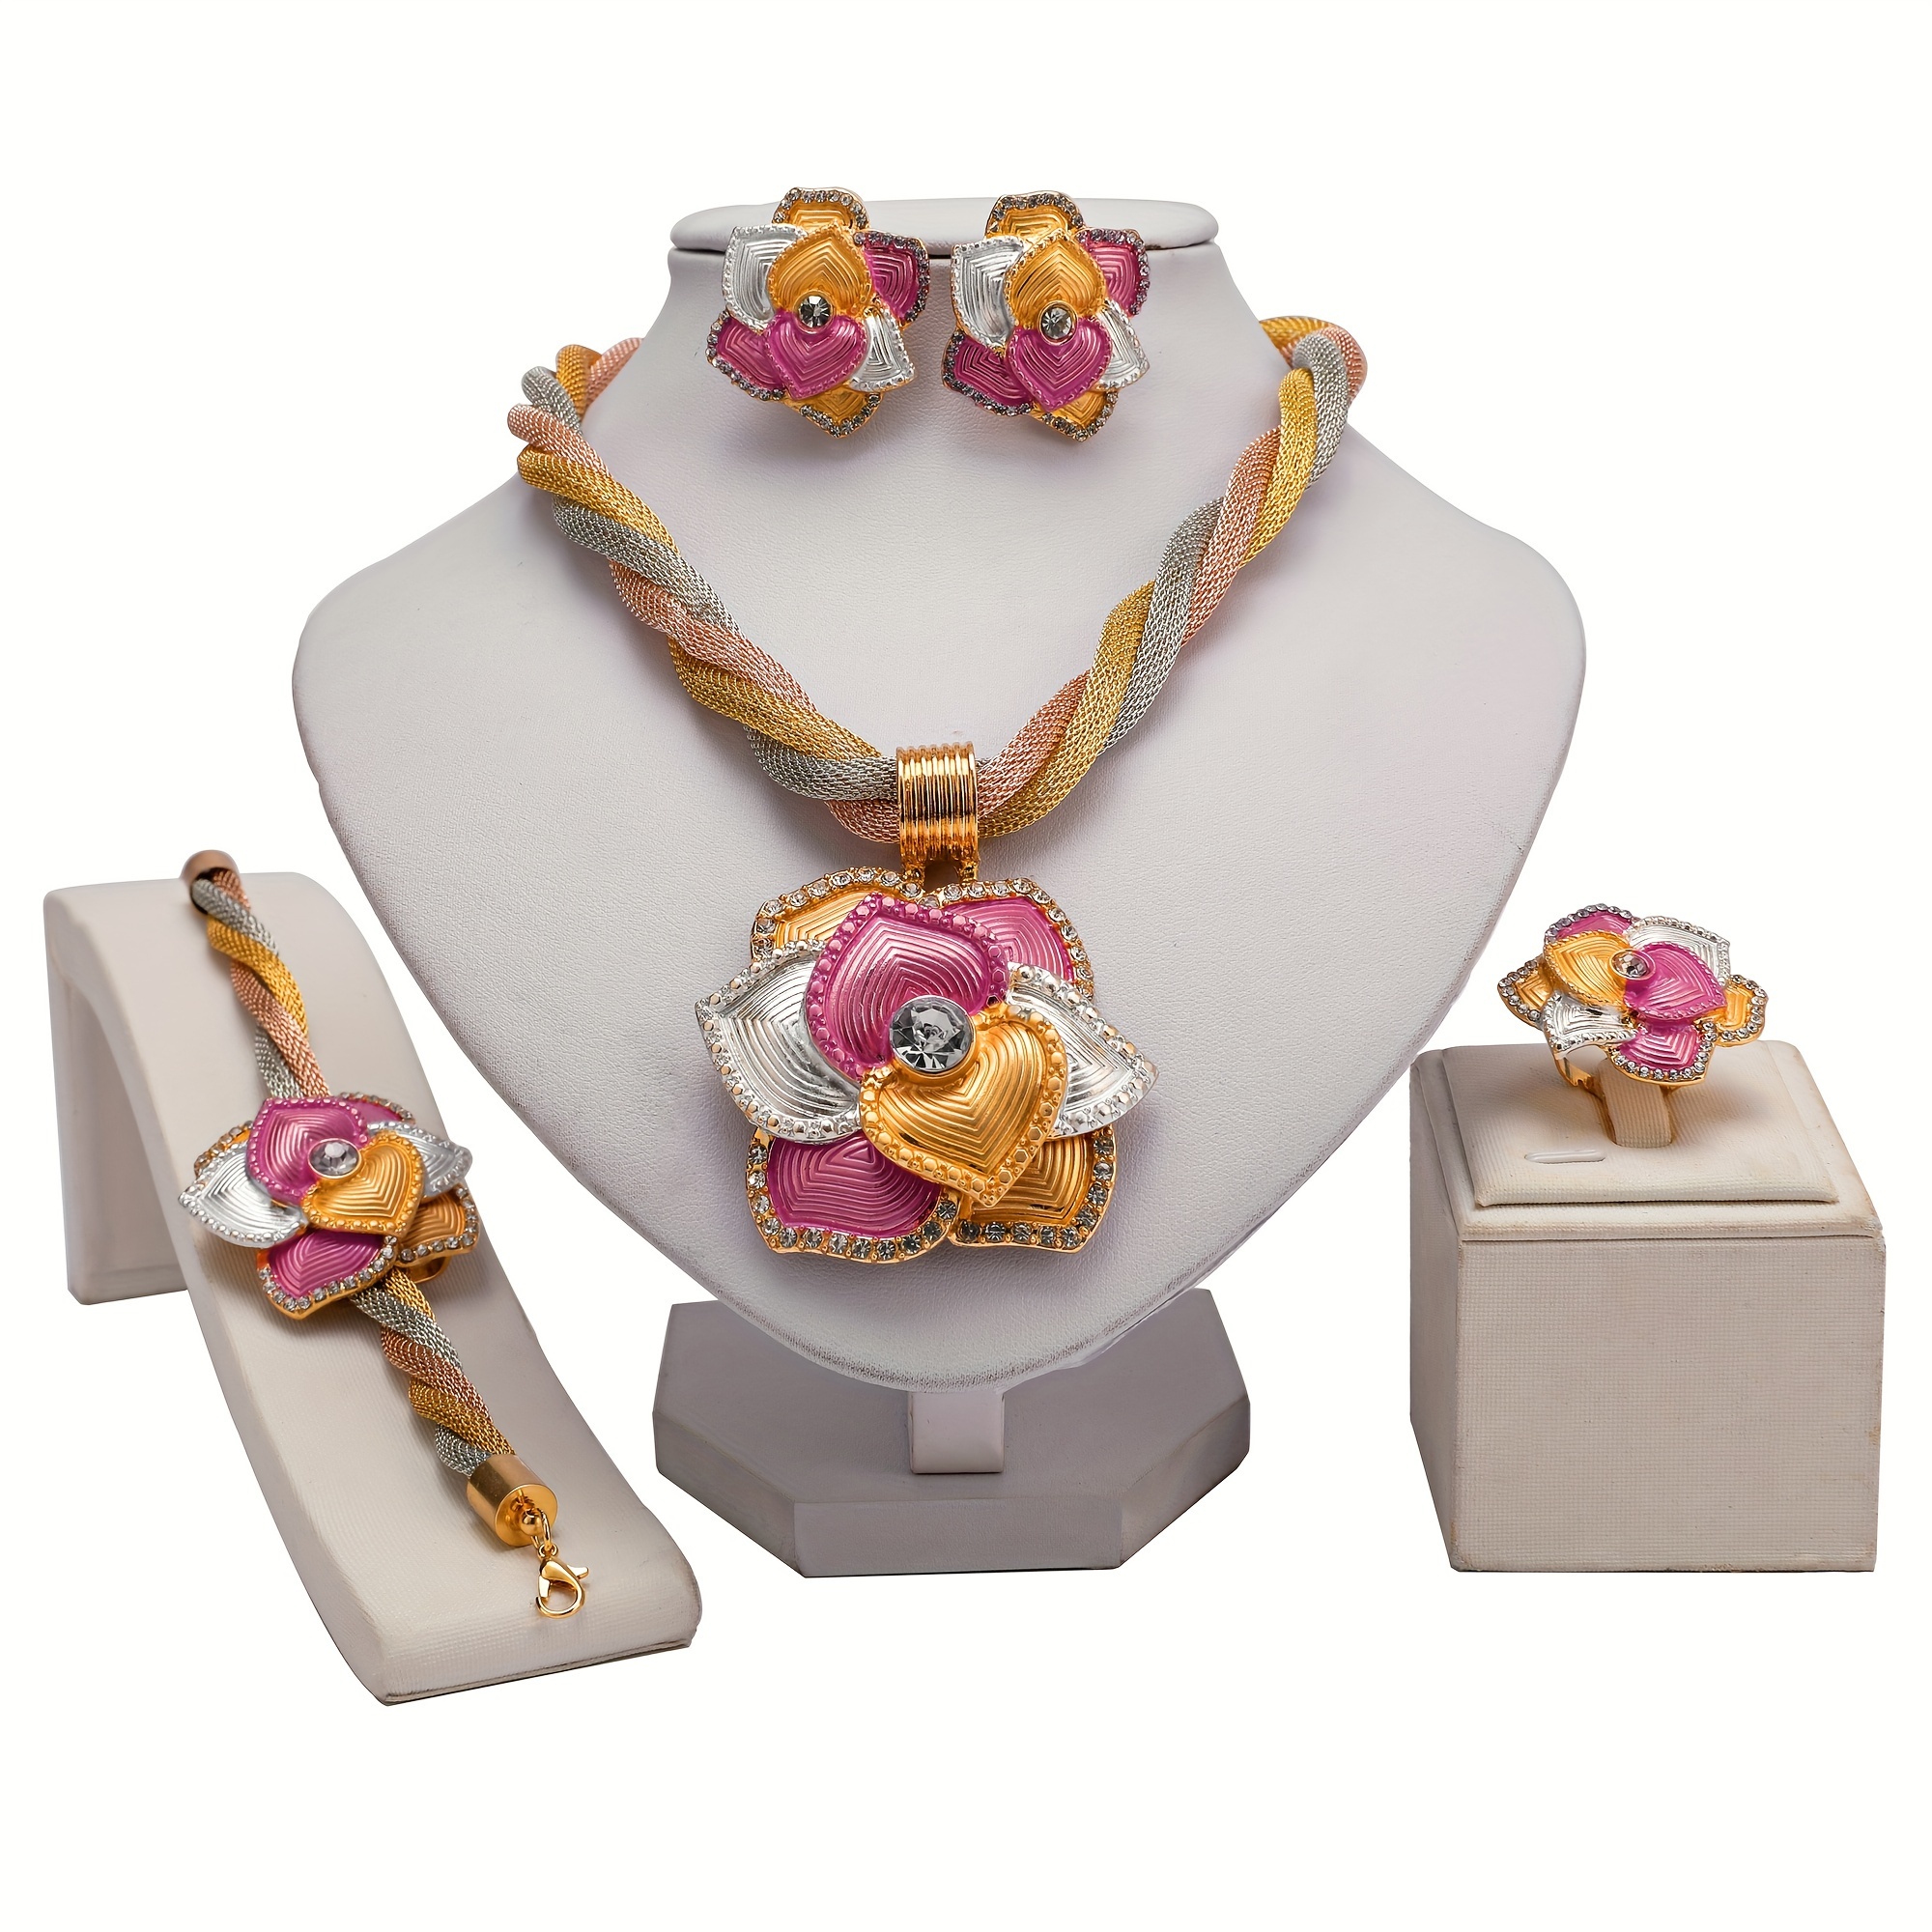 

5pcs Earrings + Necklace + Bracelet + Ring Traditional Bridal Jewelry Set Plated Exaggerated Flower Design Inlaid Gemstone Match Daily Outfits